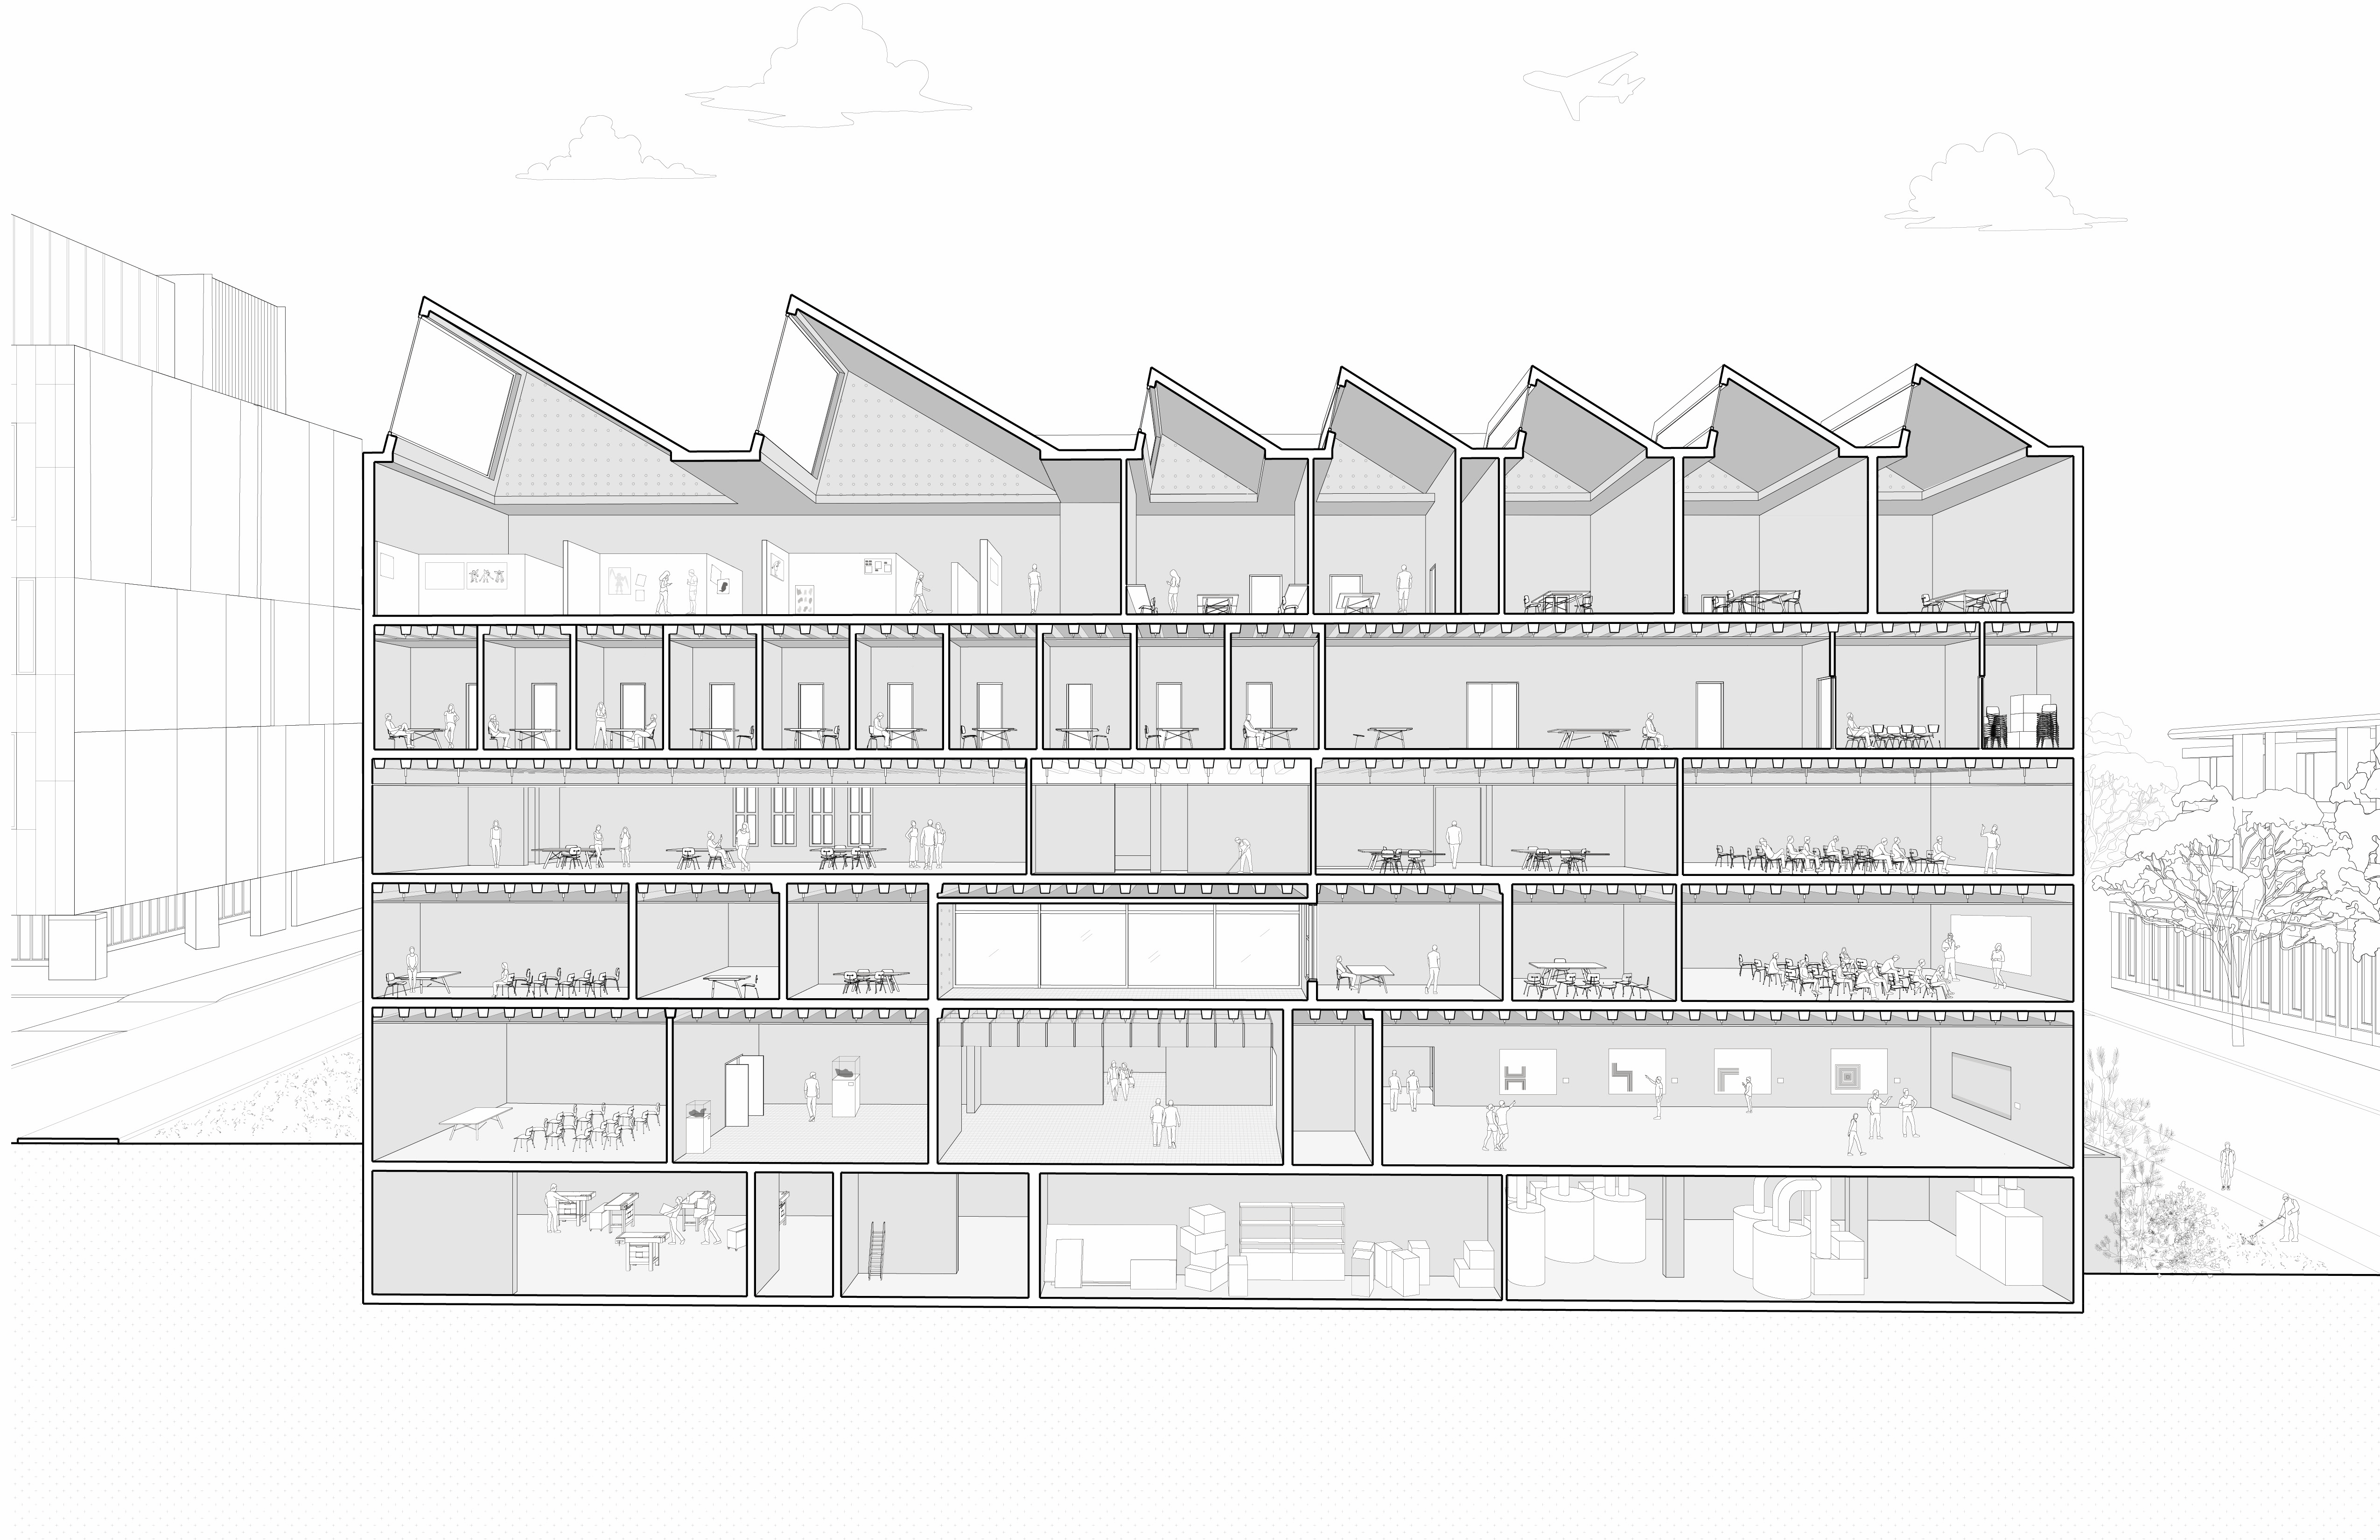 section perspectives showing the progression of deconstruction and reconstruction 